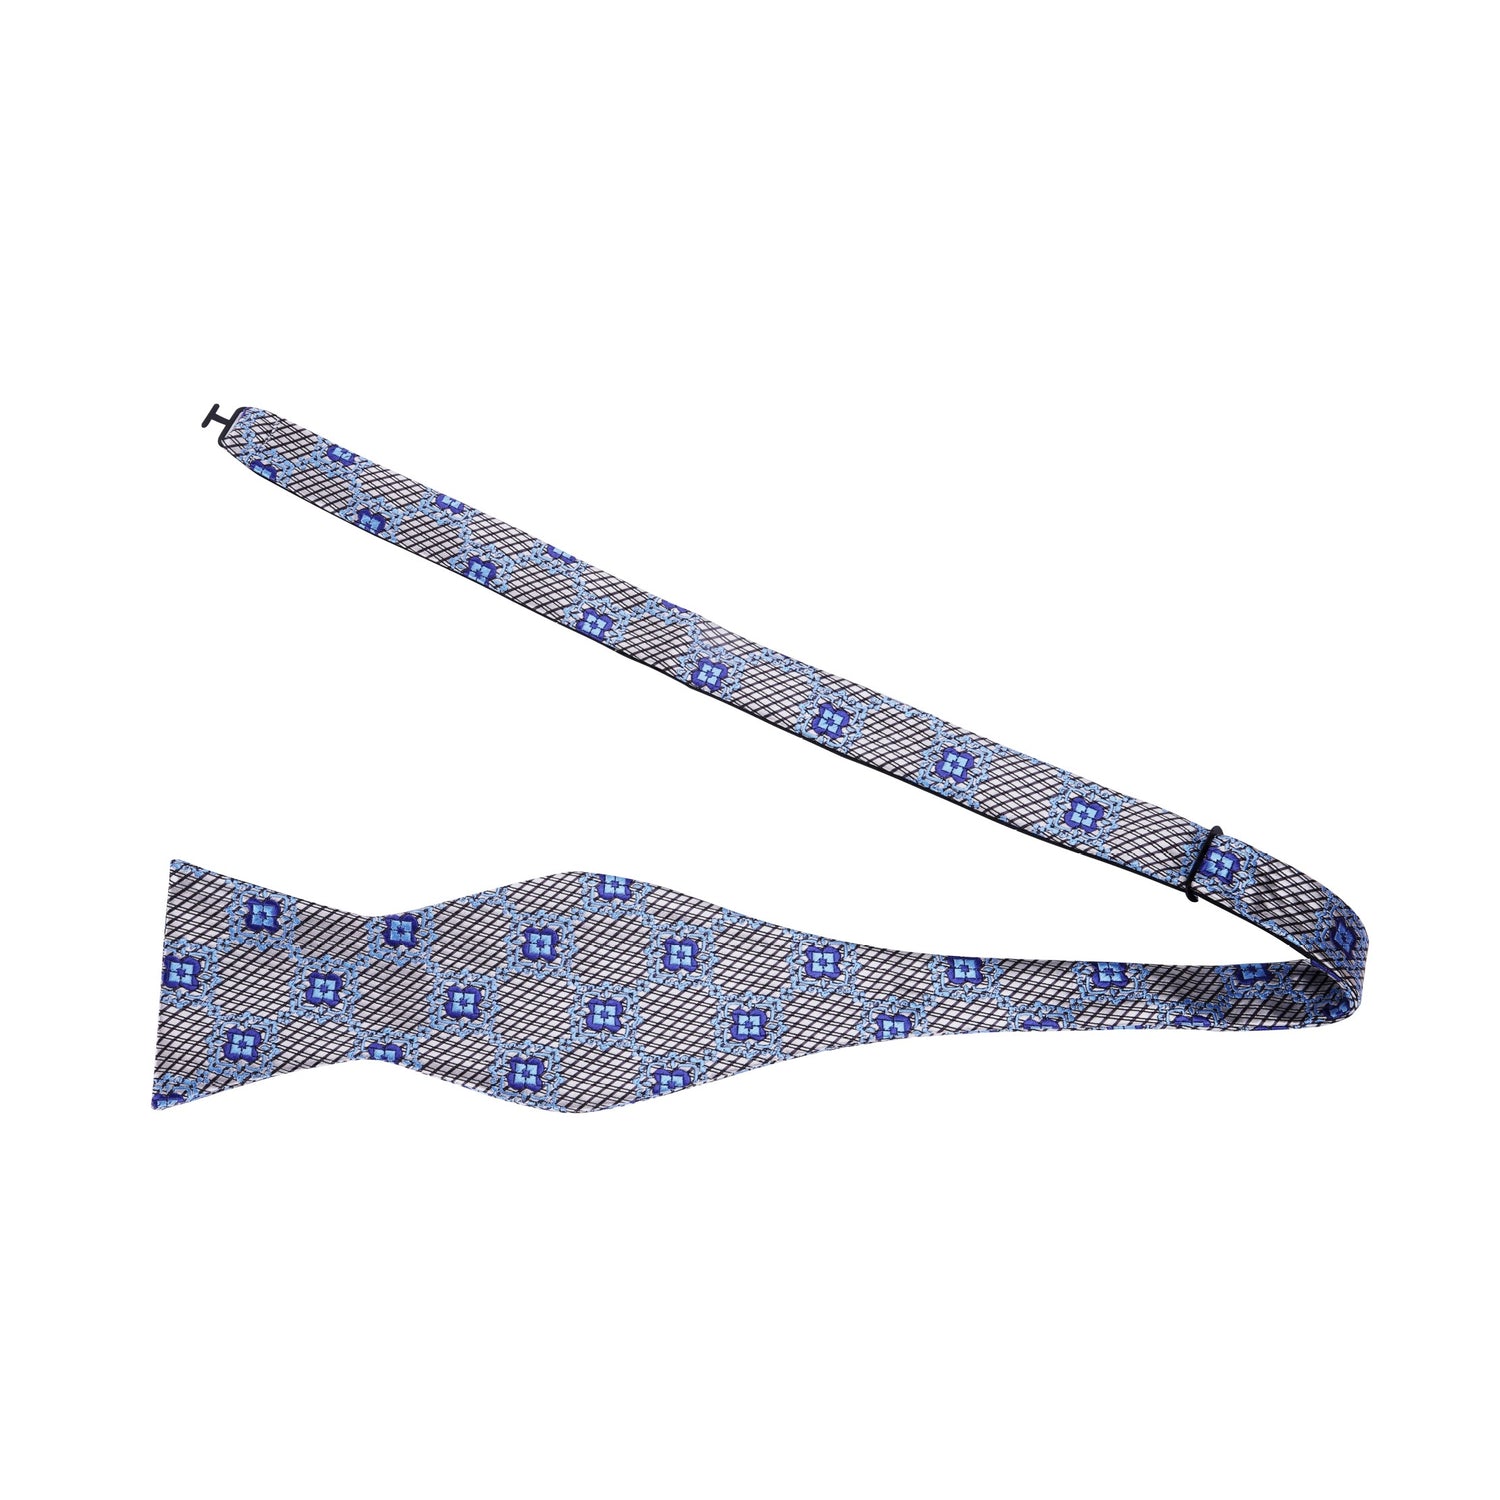 View 2: A Silver, Blue Geometric with Flower Pattern Silk Self Tie Bow Tie